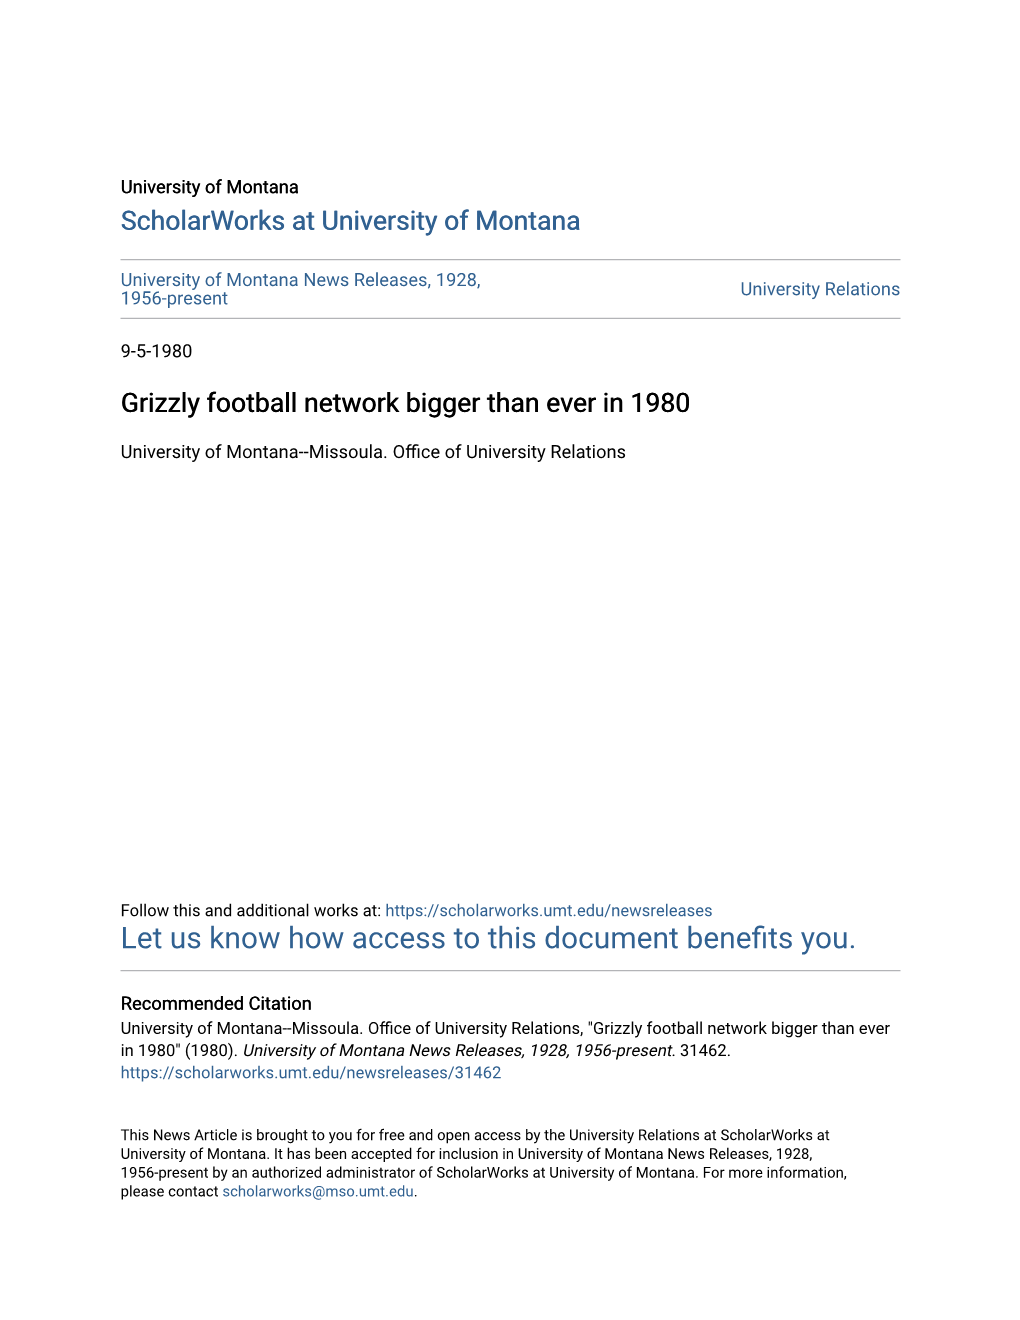 Grizzly Football Network Bigger Than Ever in 1980